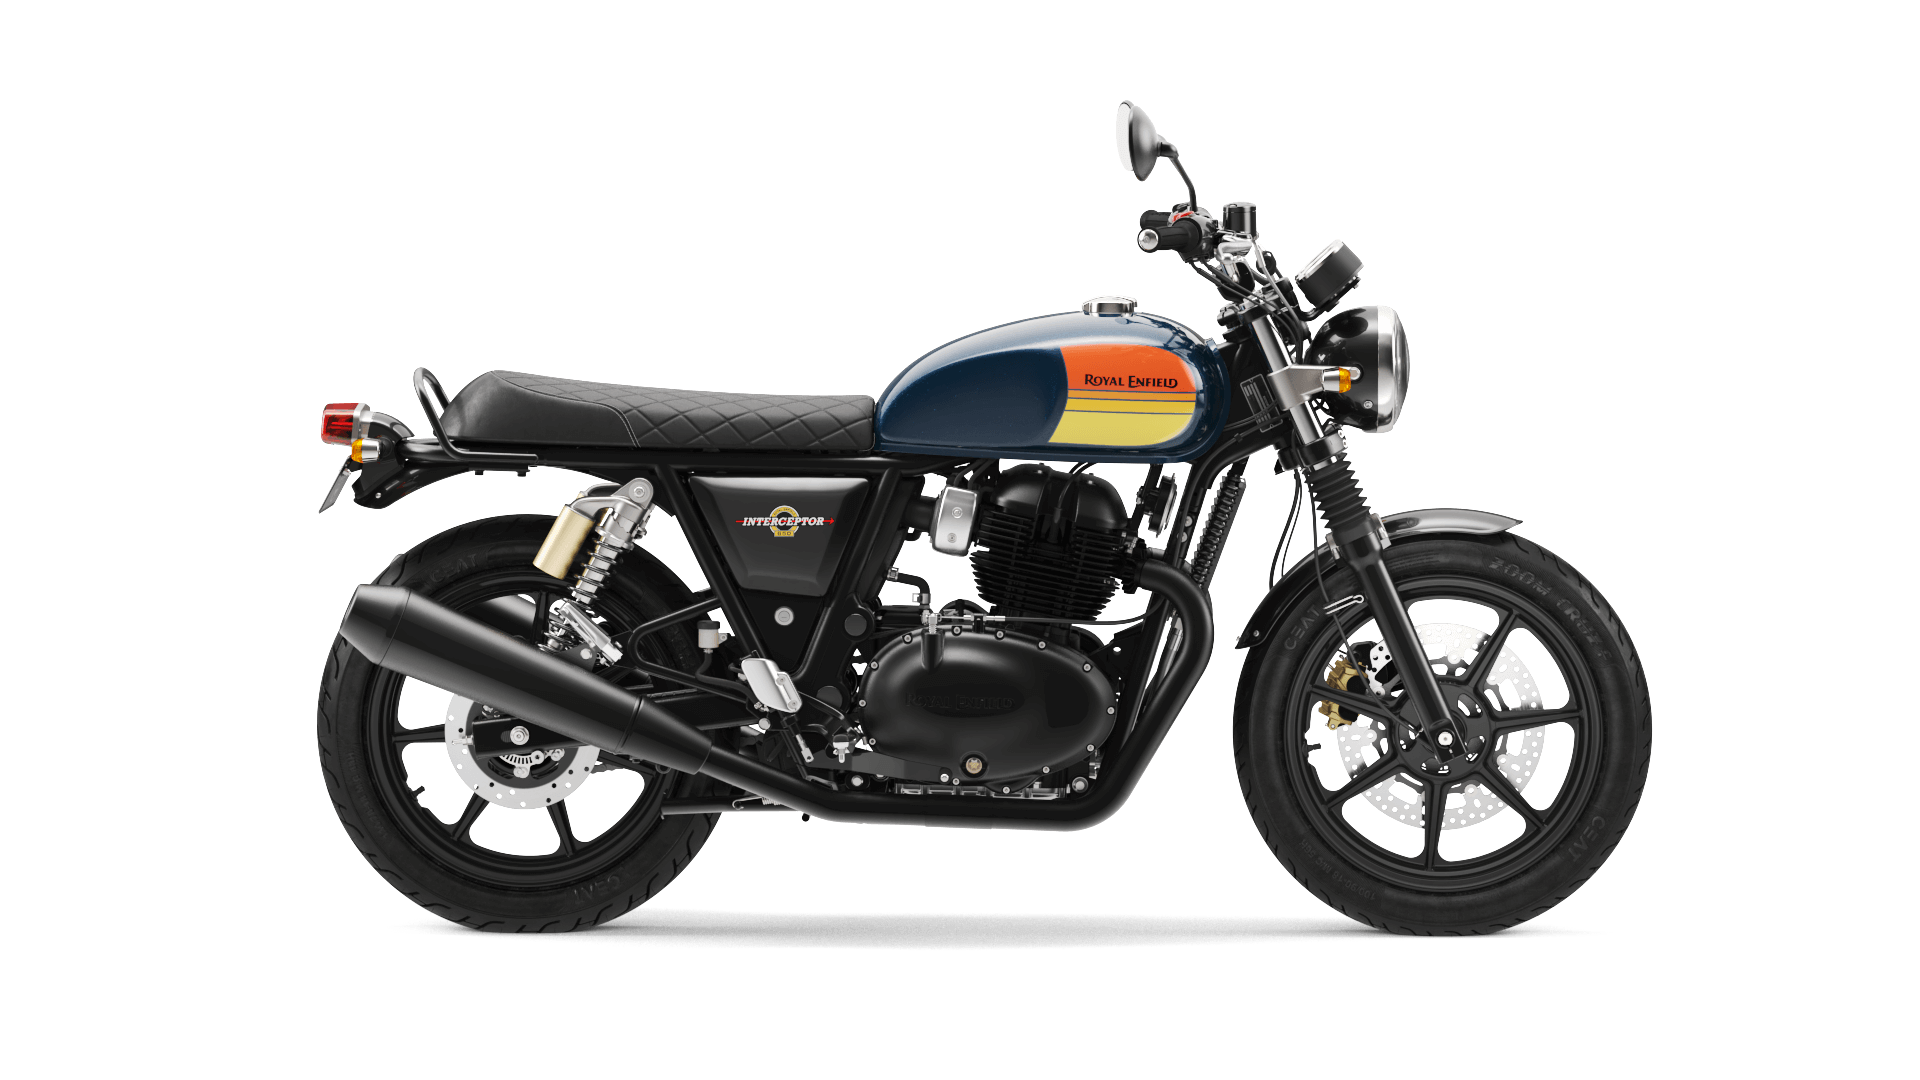 RE Interceptor 650 Price, Colours, Images & Mileage in UK Royal Enfield